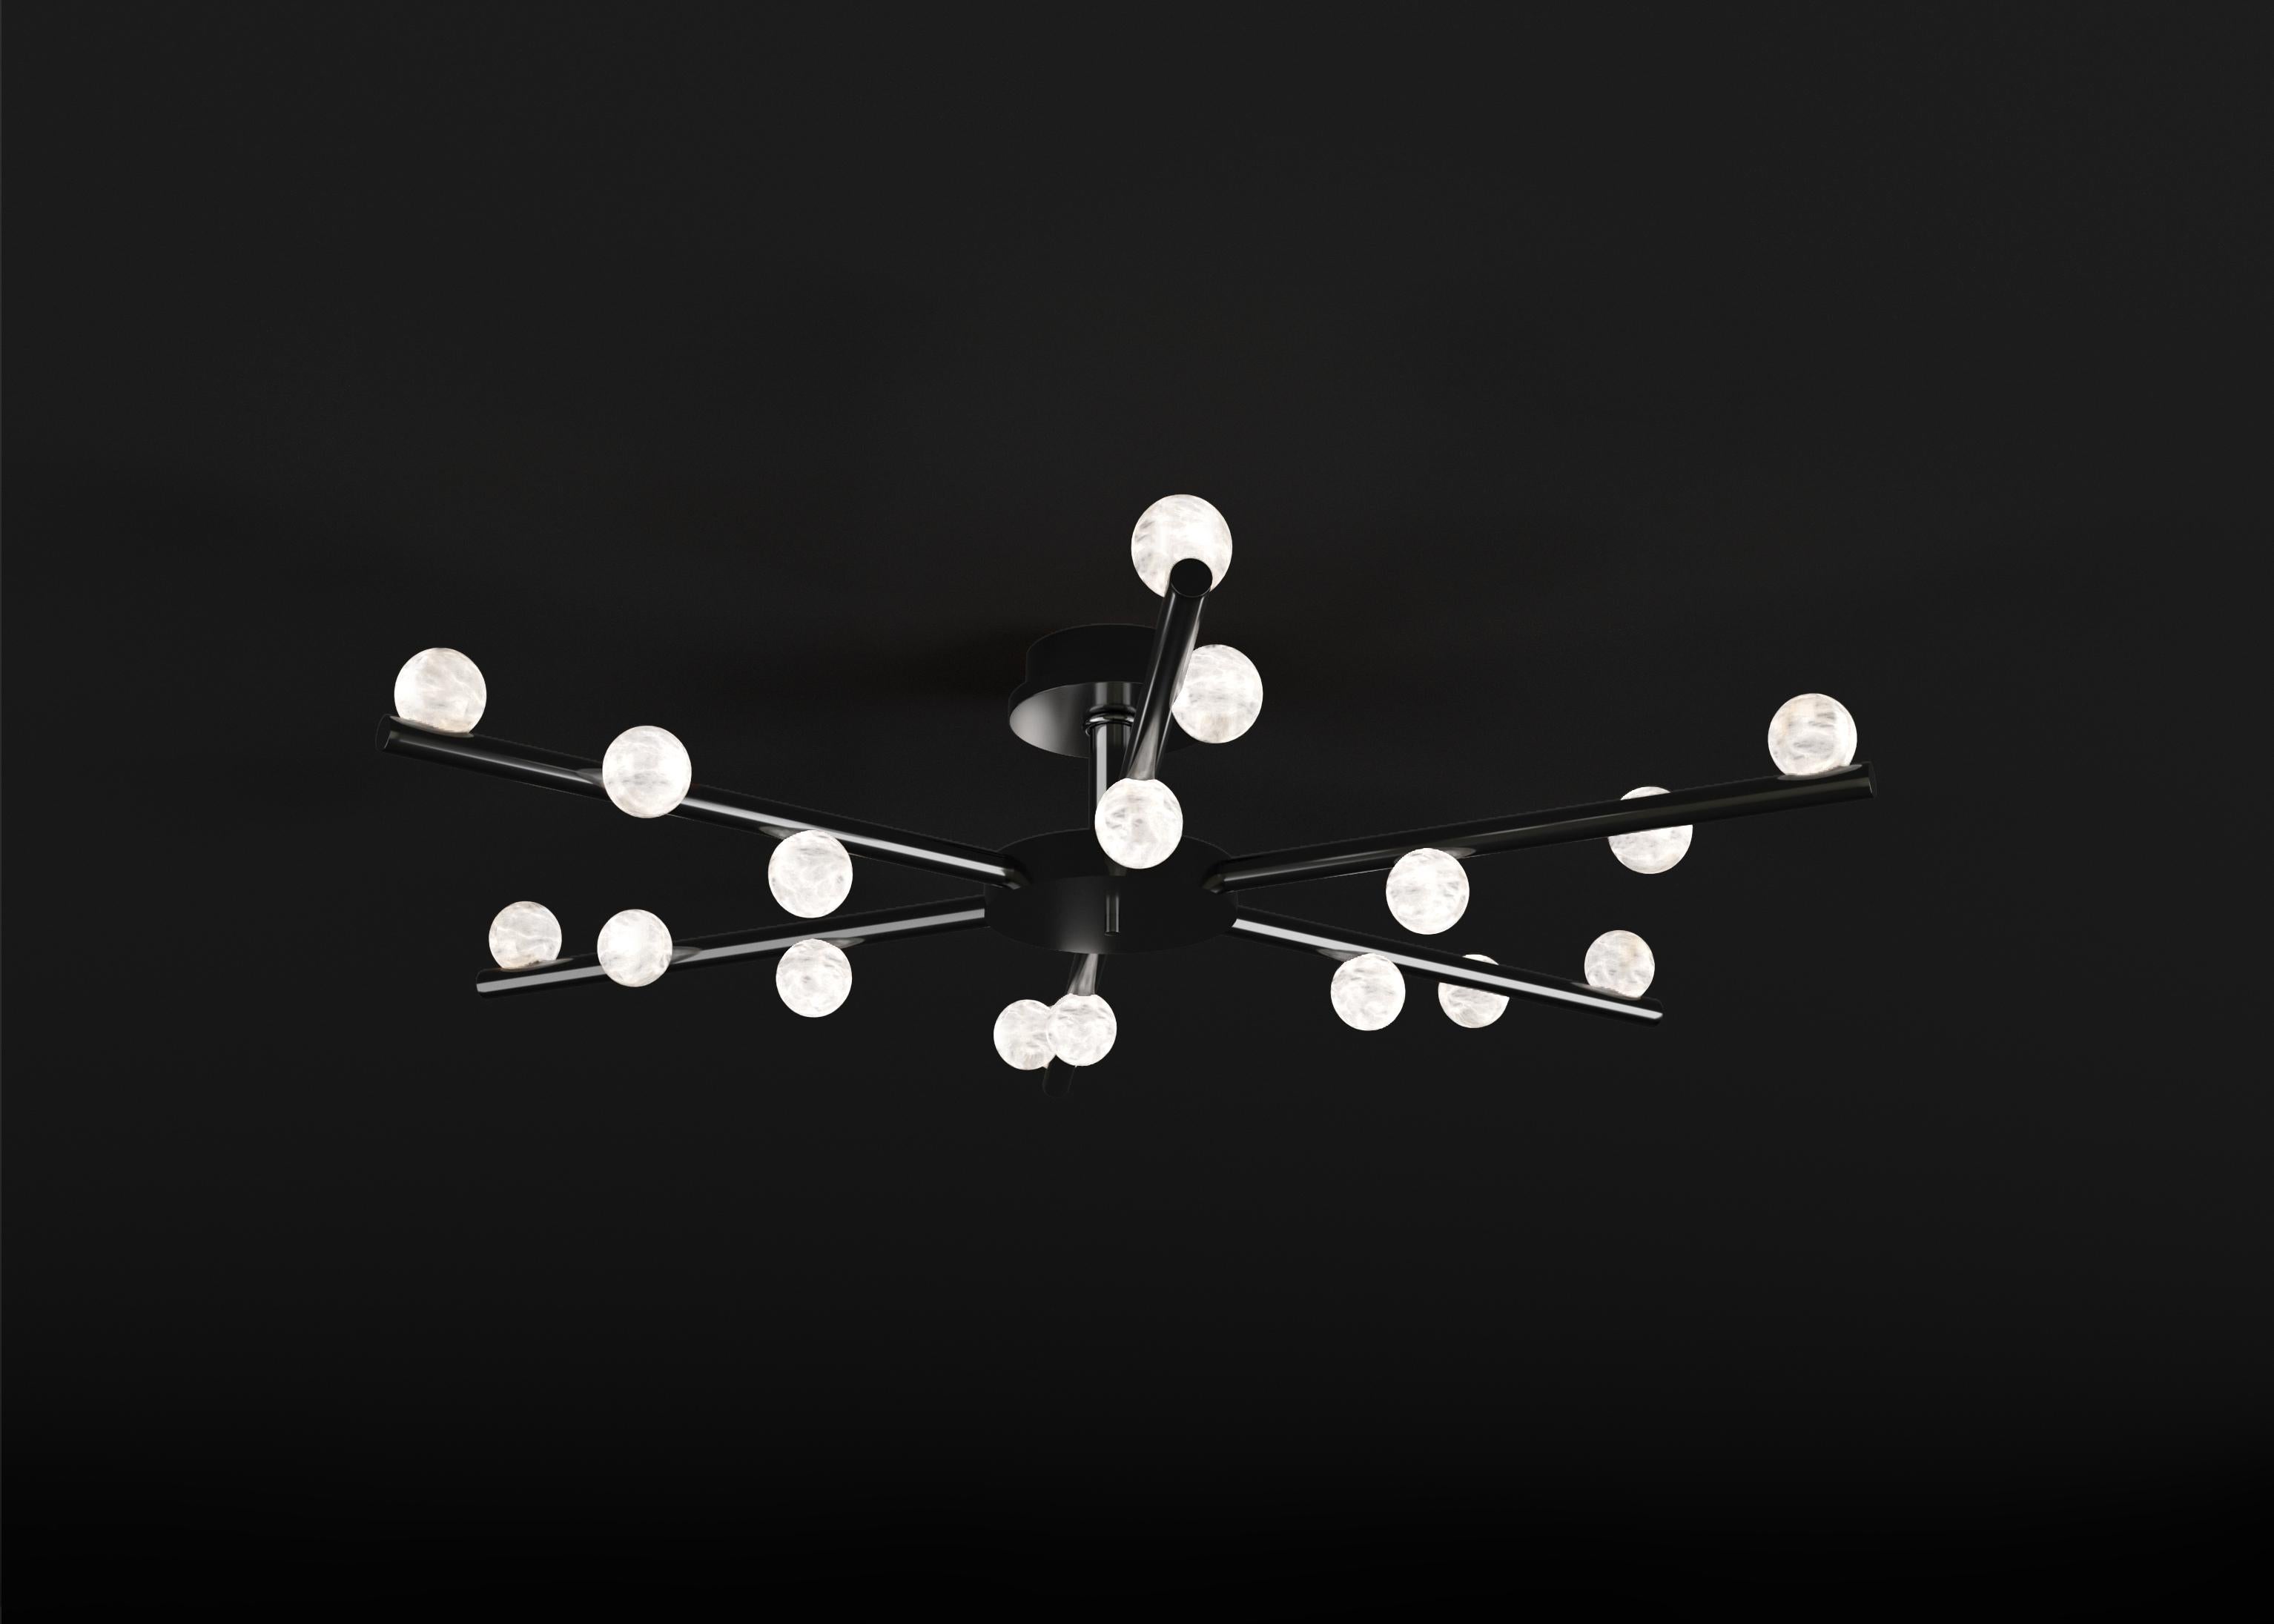 Demetra Shiny Black Metal Ceiling Lamp by Alabastro Italiano
Dimensions: D 85 x W 97 x H 22 cm.
Materials: White alabaster and shiny black metal.

Available in different finishes: Shiny Silver, Bronze, Brushed Brass, Ruggine of Florence, Brushed